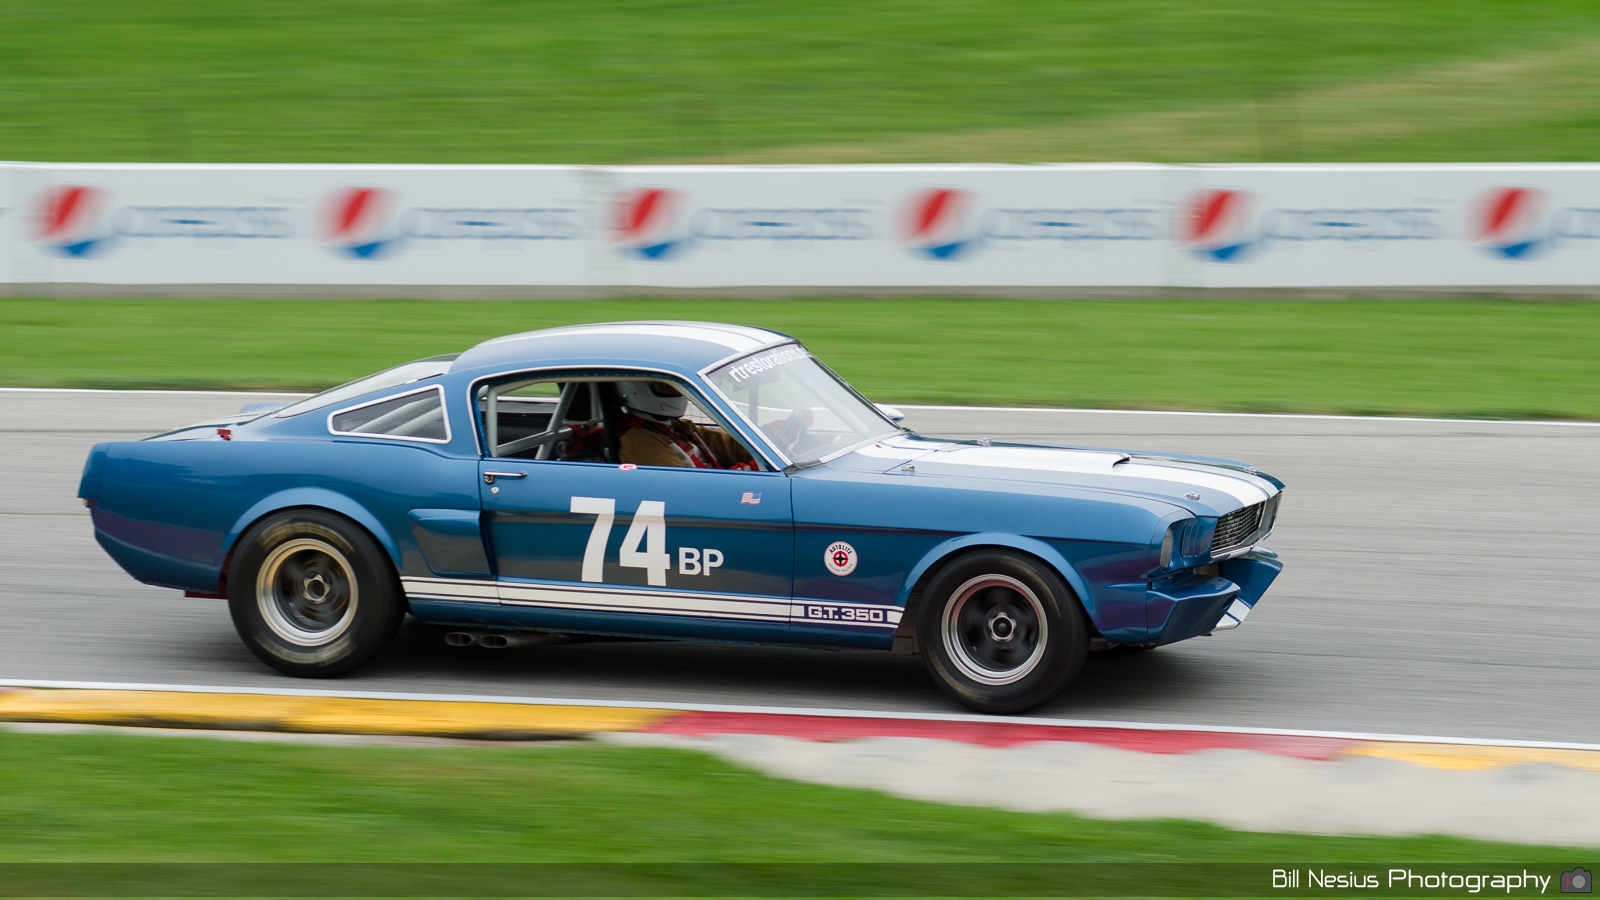 Ford Mustang Shelby GT350 Number 74 / DSC_1921 / 4